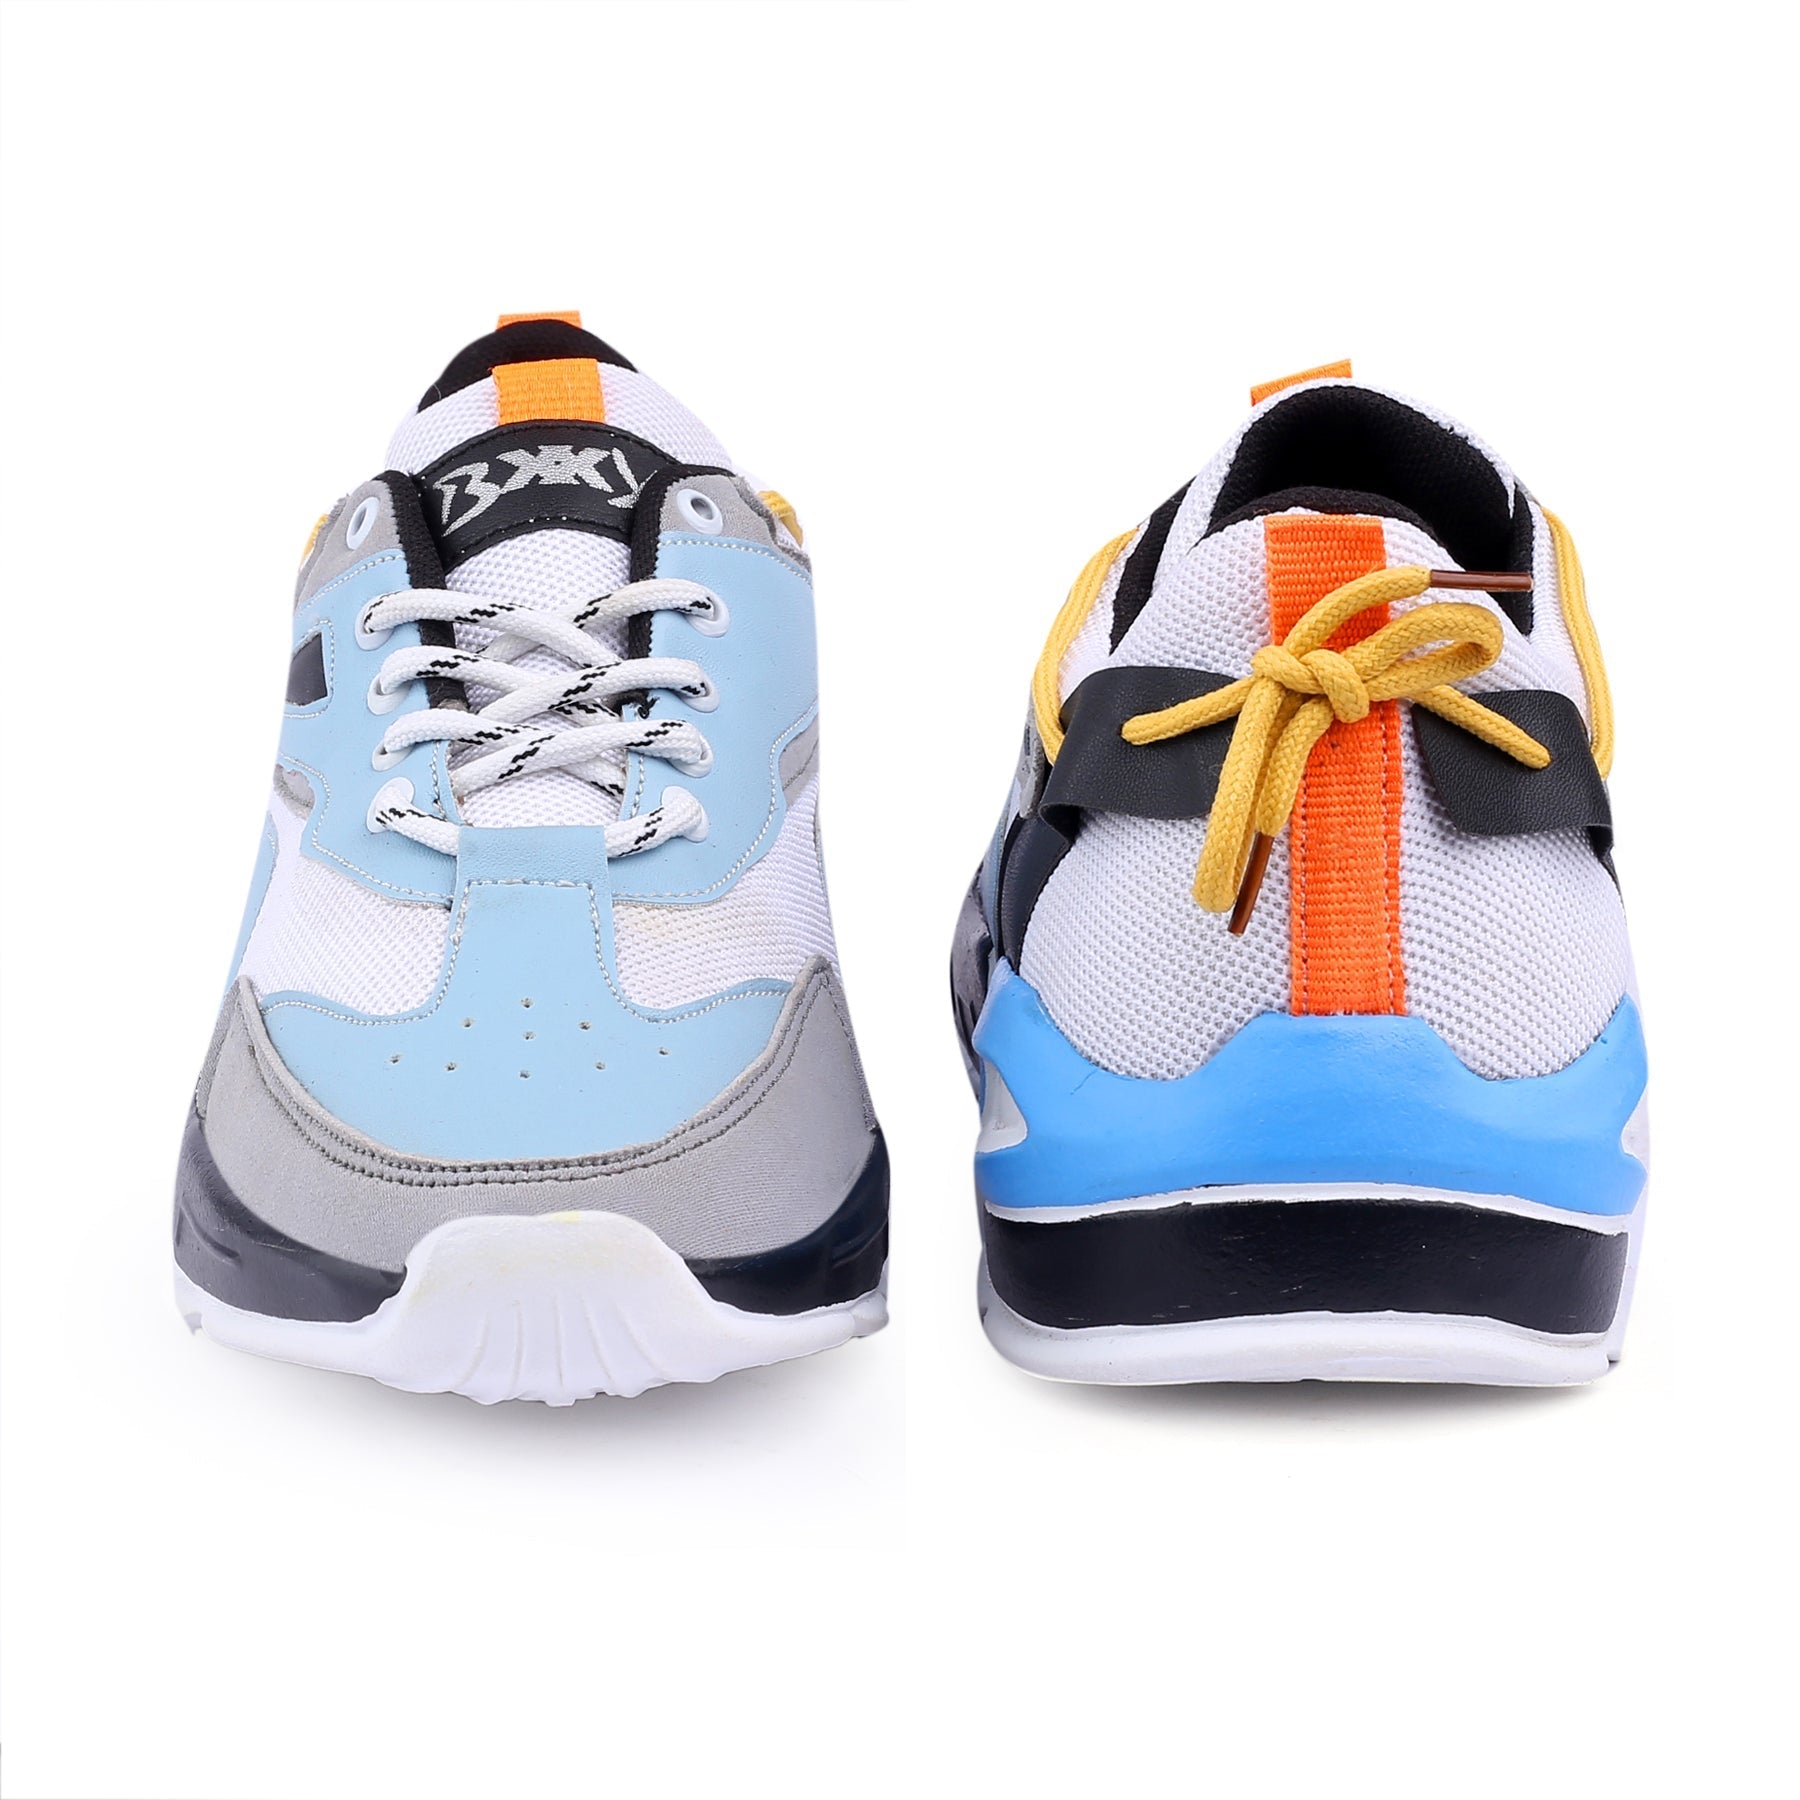 asian Asian Hattrick-21 sports shoes for men | Latest Stylish Casual  sneakers for men | running shoes for boys | Lace up lightweight black shoes  for running, walking, gym, trekking, hiking &